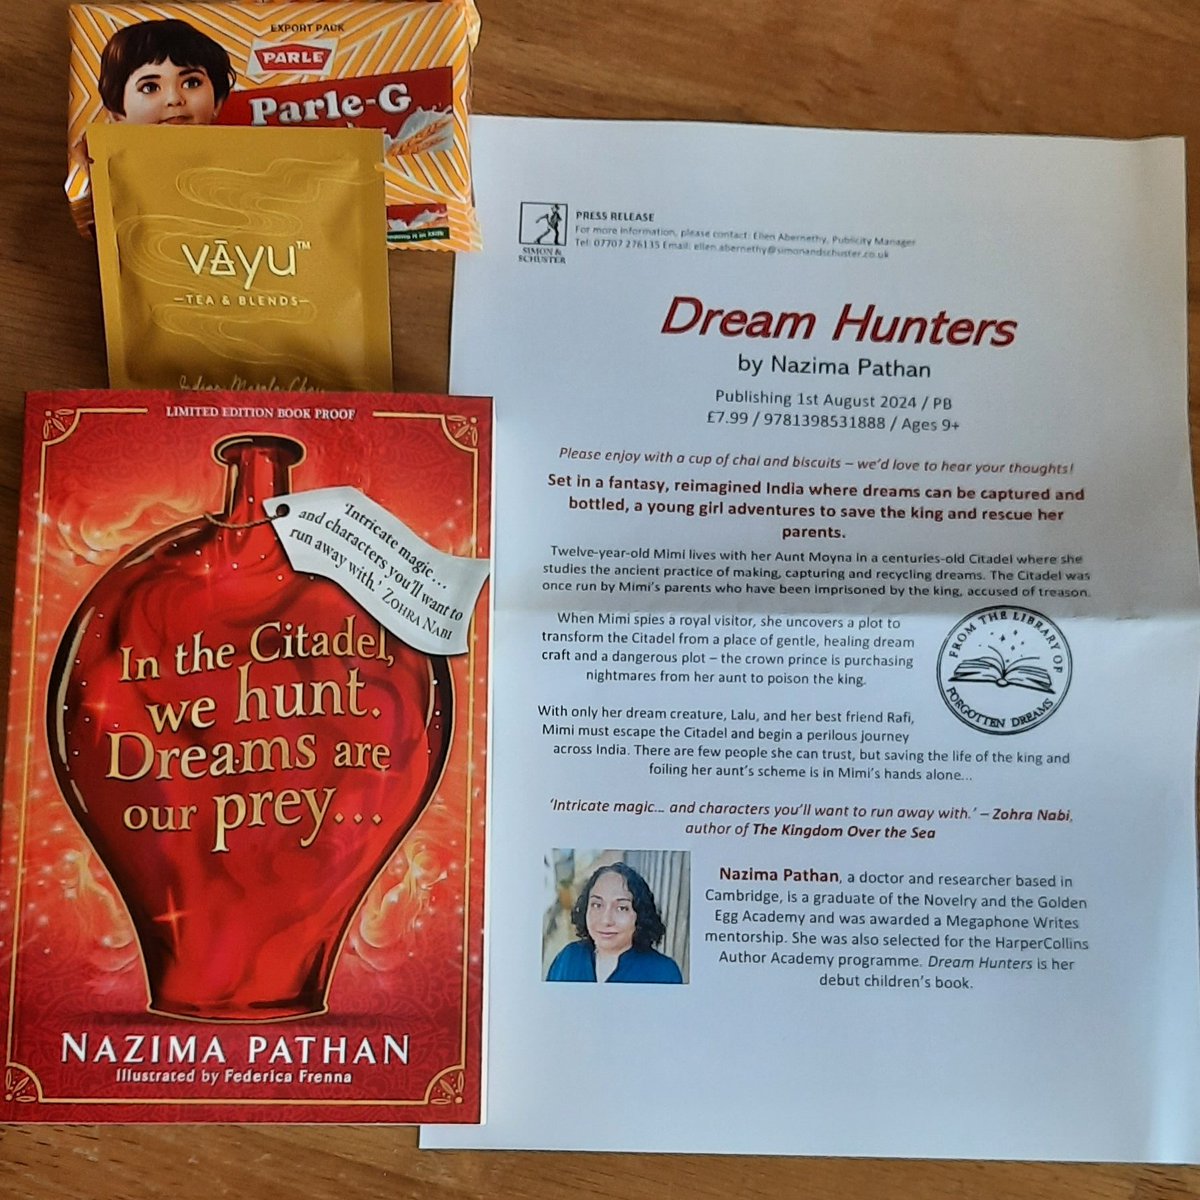 Hugely thanks to @simonkids_UK for this wonderful book post, Dream Hunters by Nazima Pathan❤️📚📮 Apart from the enchanting fantasy sounding right up my bookshelf, it shoots straight to the top of the pile so I can try the tea! @drnazimapathan